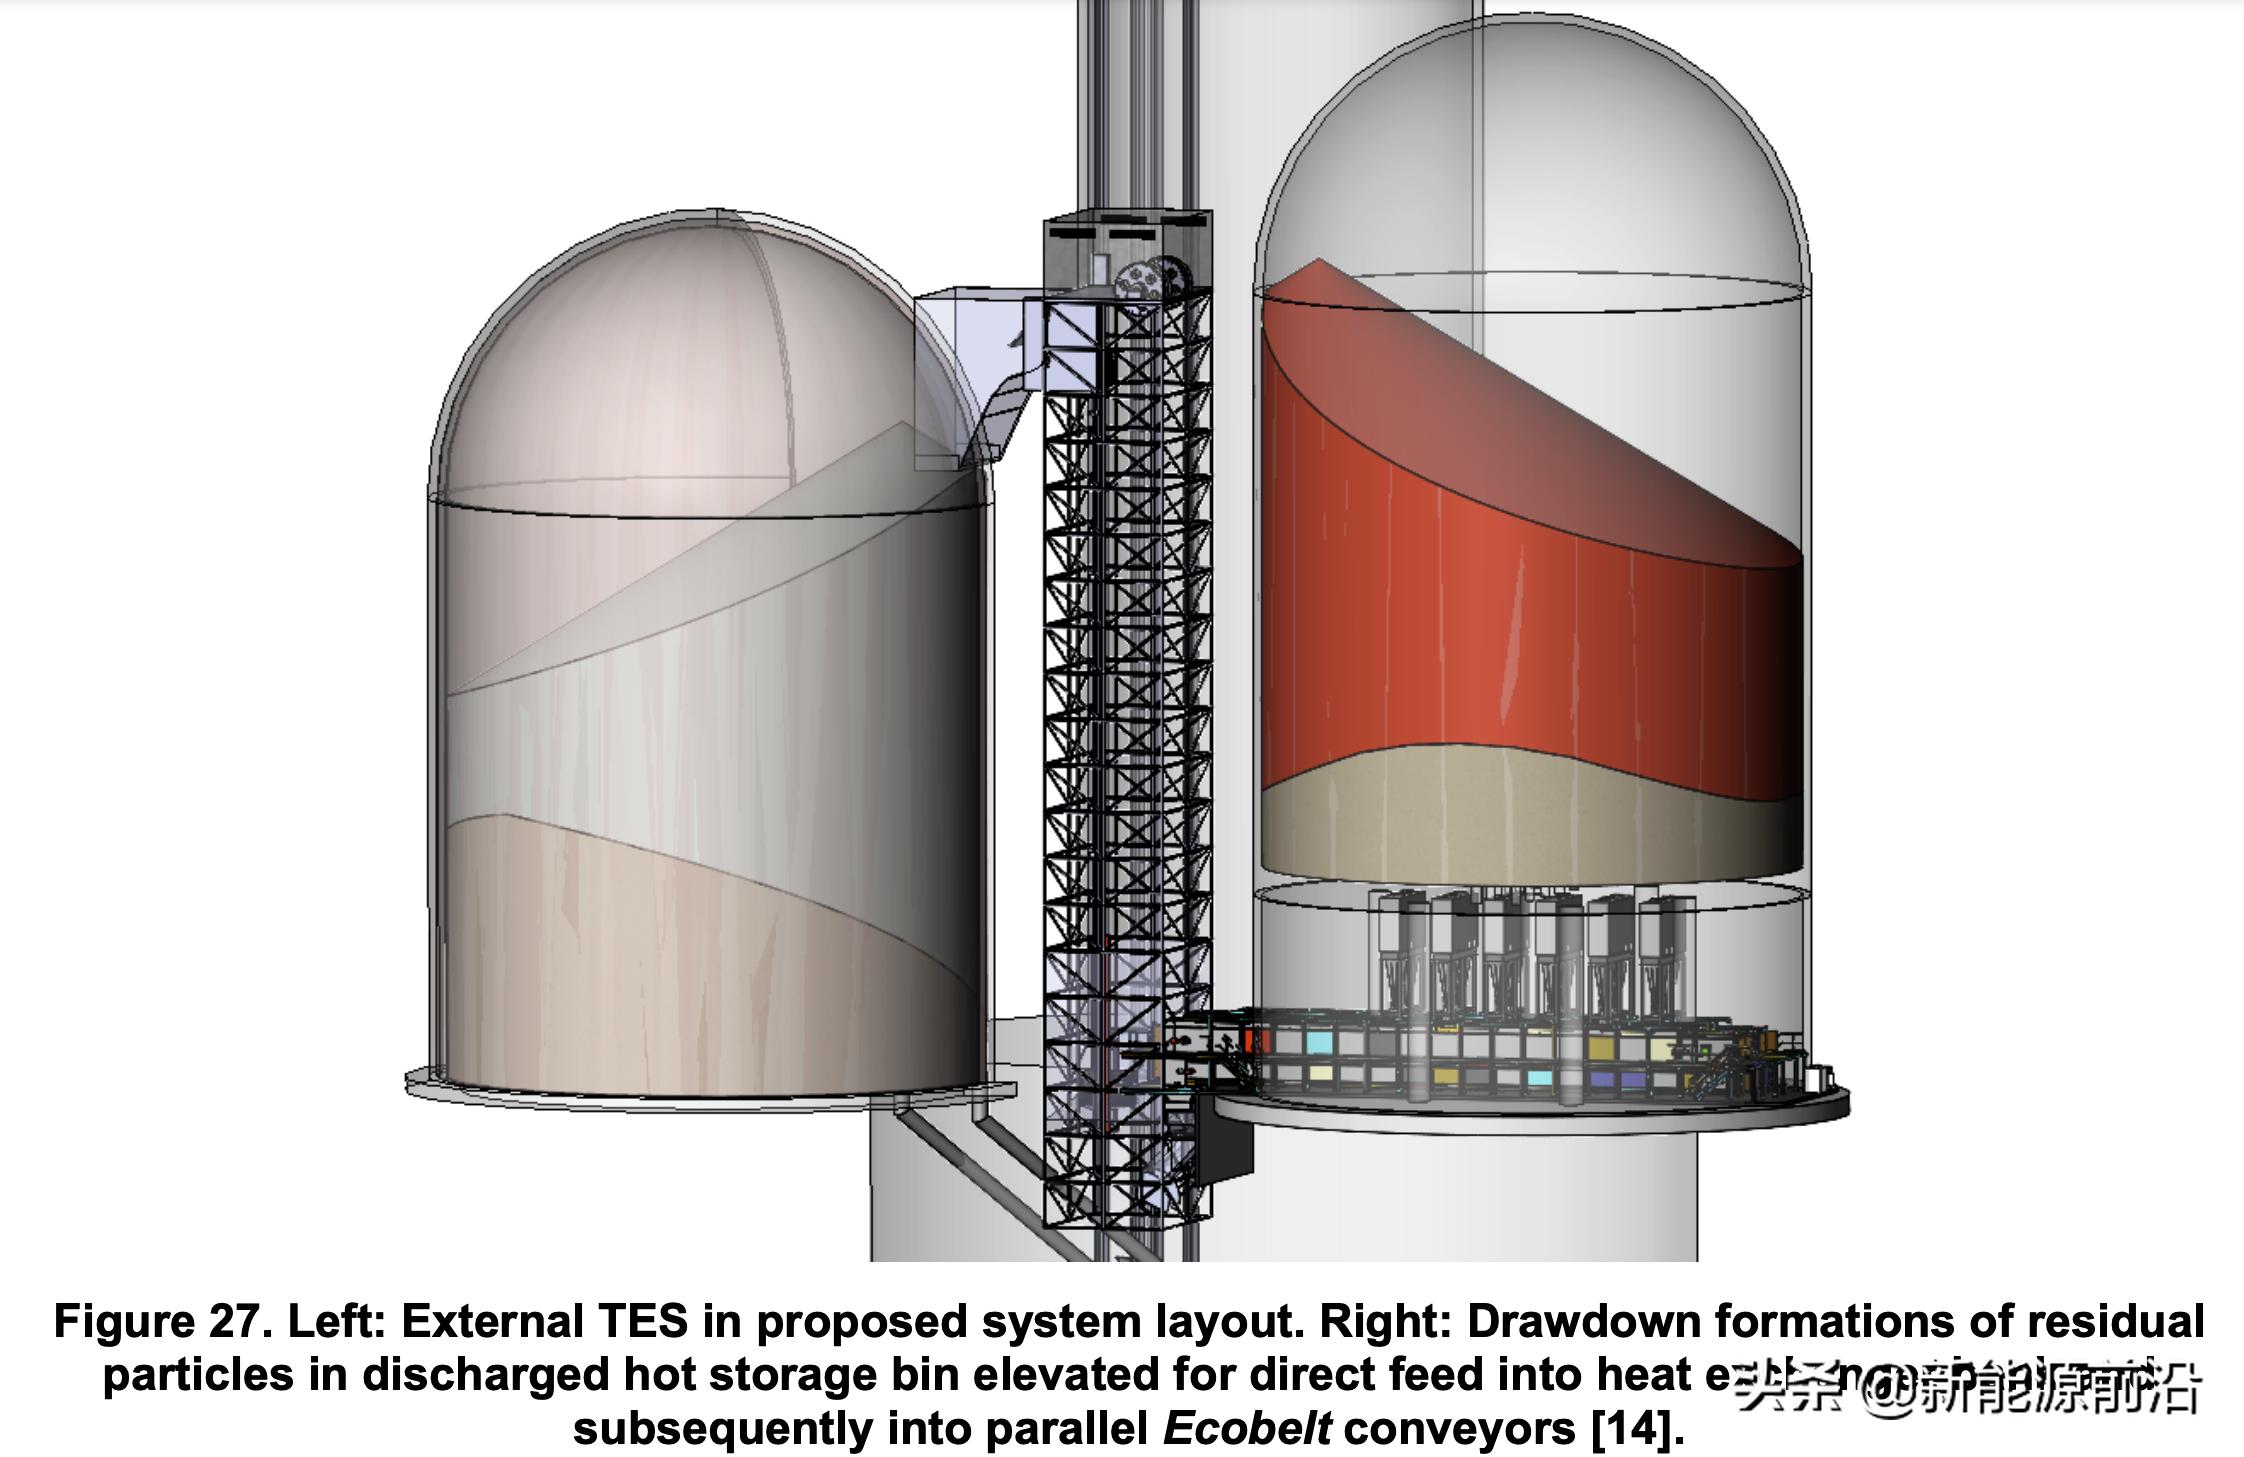 How will the pellet tower CSP system lift several tons of hot sand?